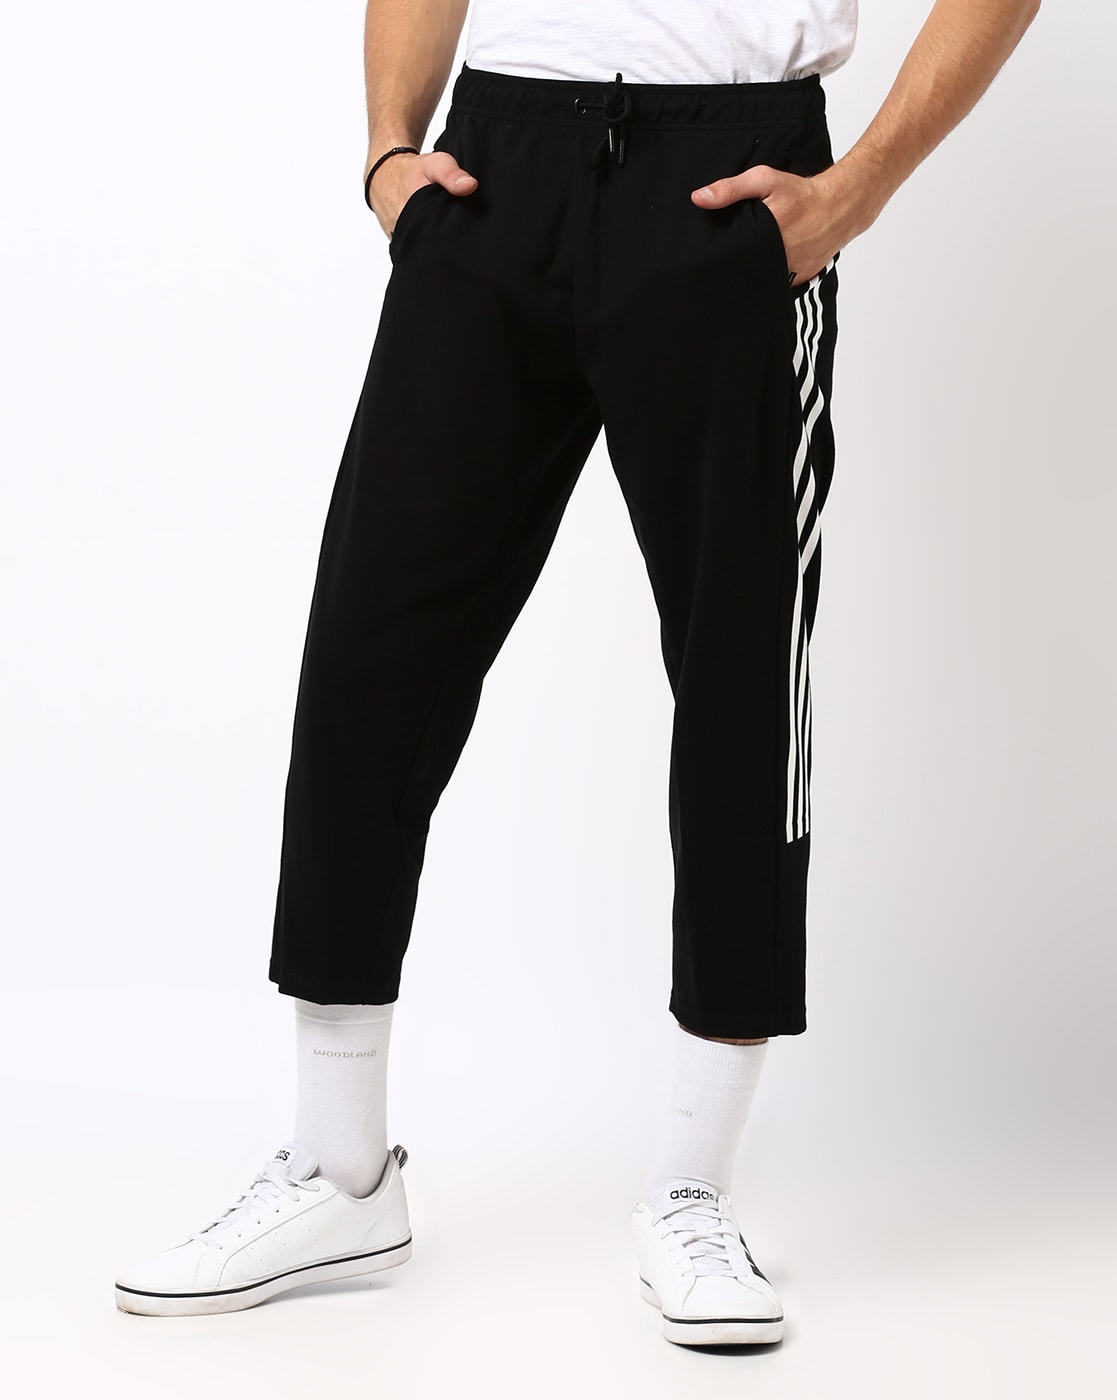 Buy Black Track Pants for Men by ADIDAS 